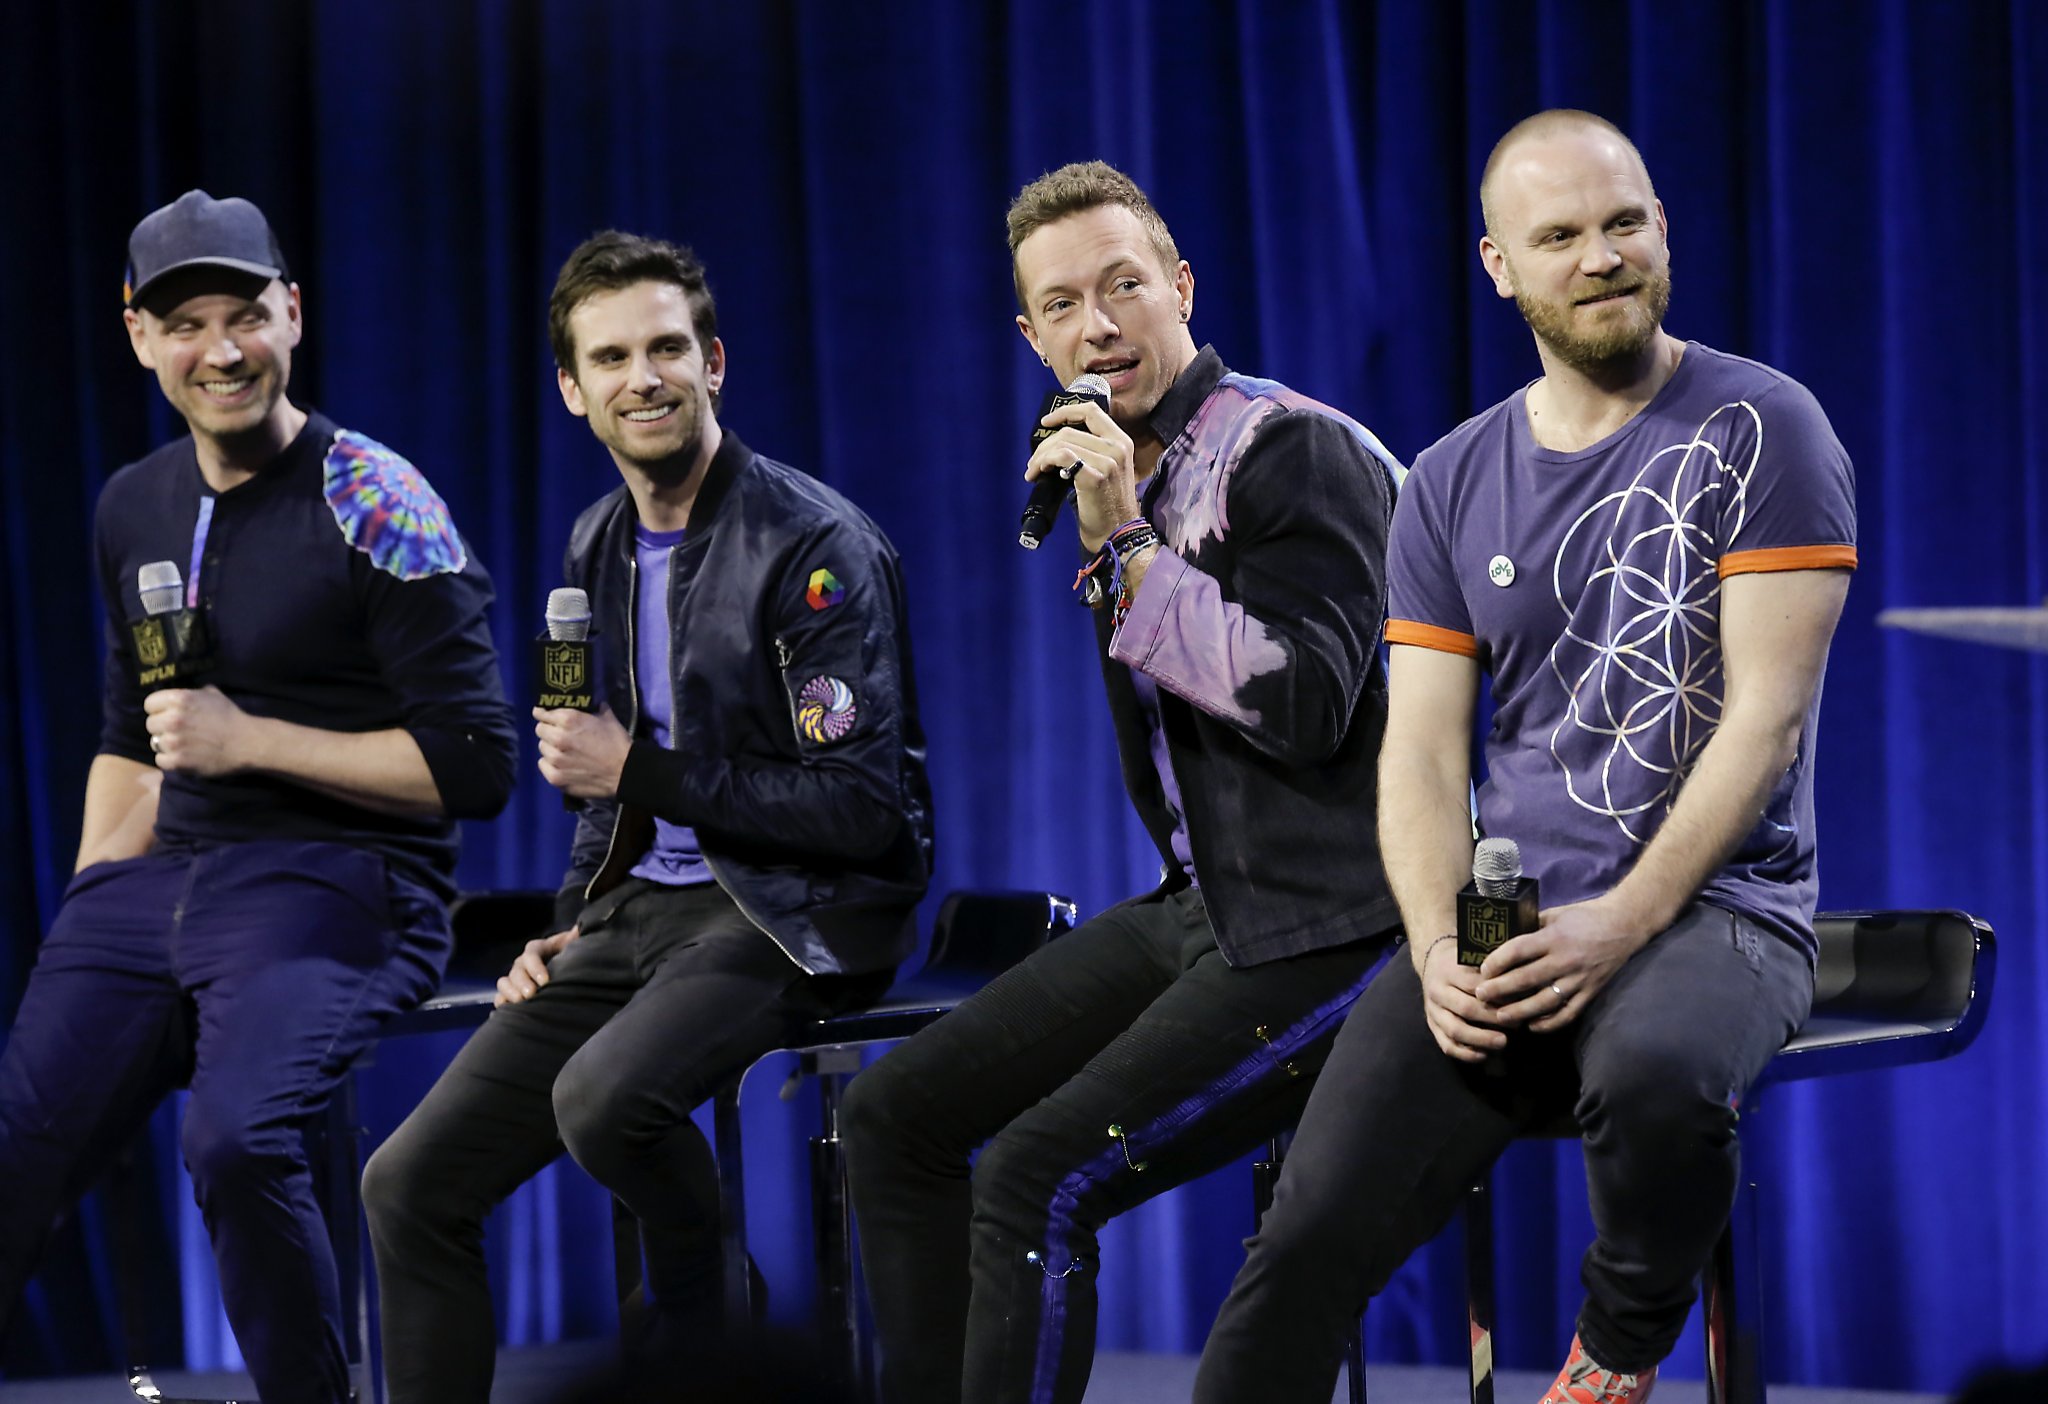 Will Champion of Coldplay during Coldplay Press Conference - Final